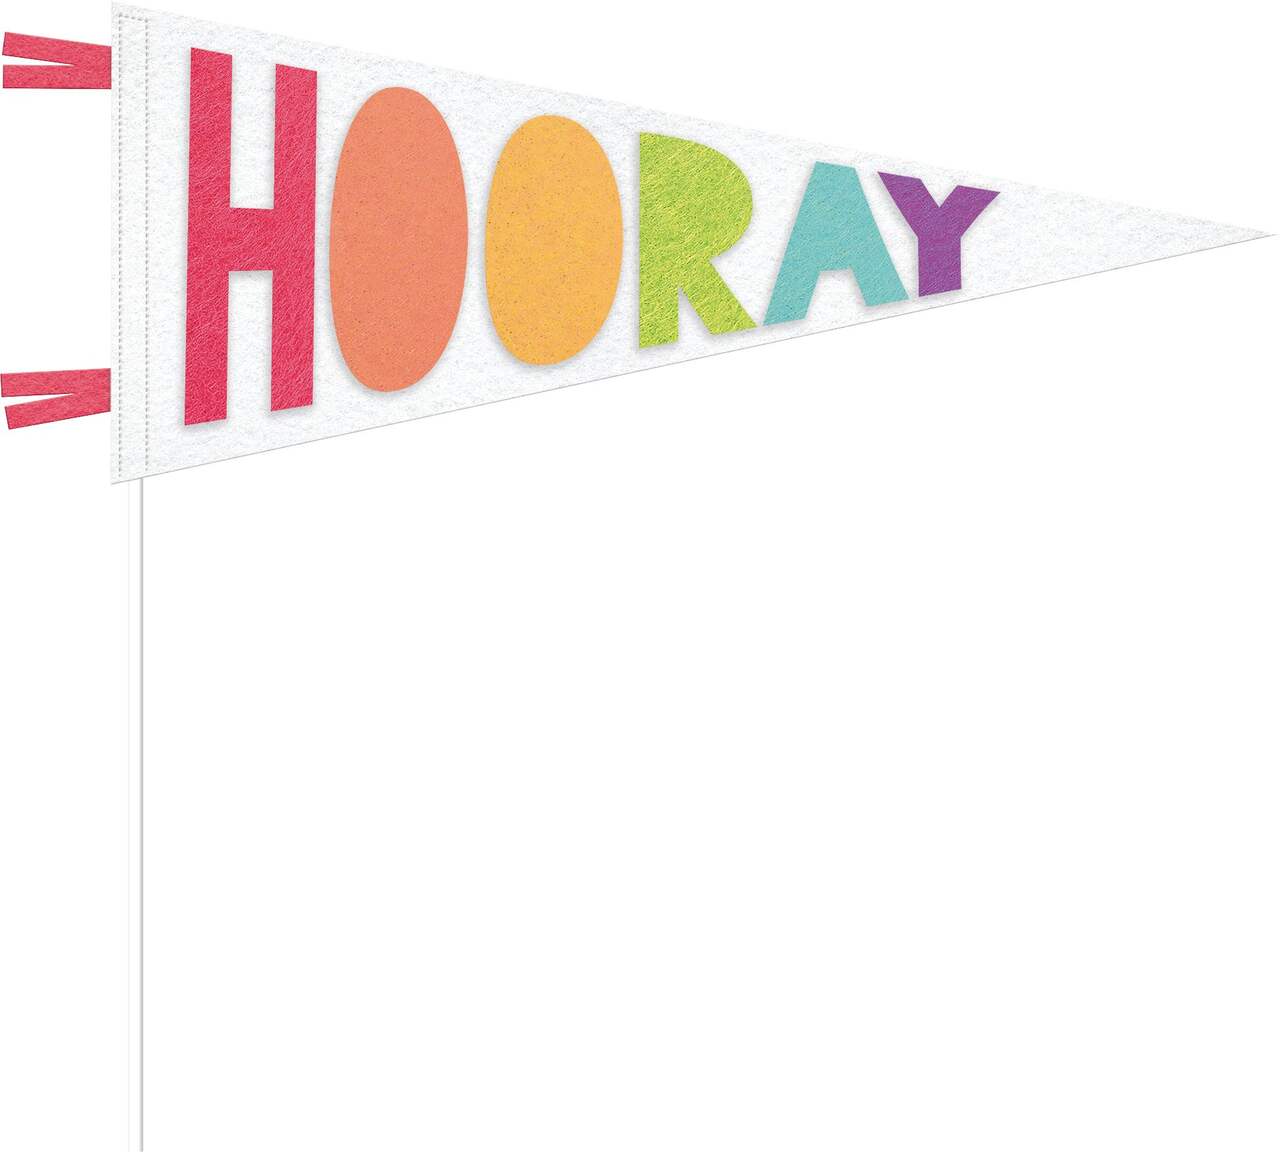 https://media-www.canadiantire.ca/product/seasonal-gardening/party-city-everyday/party-city-party-supplies-decor/8434981/sign-of-the-times-hooray-pennant-flag-8eb9e7c8-19d6-44a2-ac39-3c2b50637c3f-jpgrendition.jpg?imdensity=1&imwidth=640&impolicy=mZoom